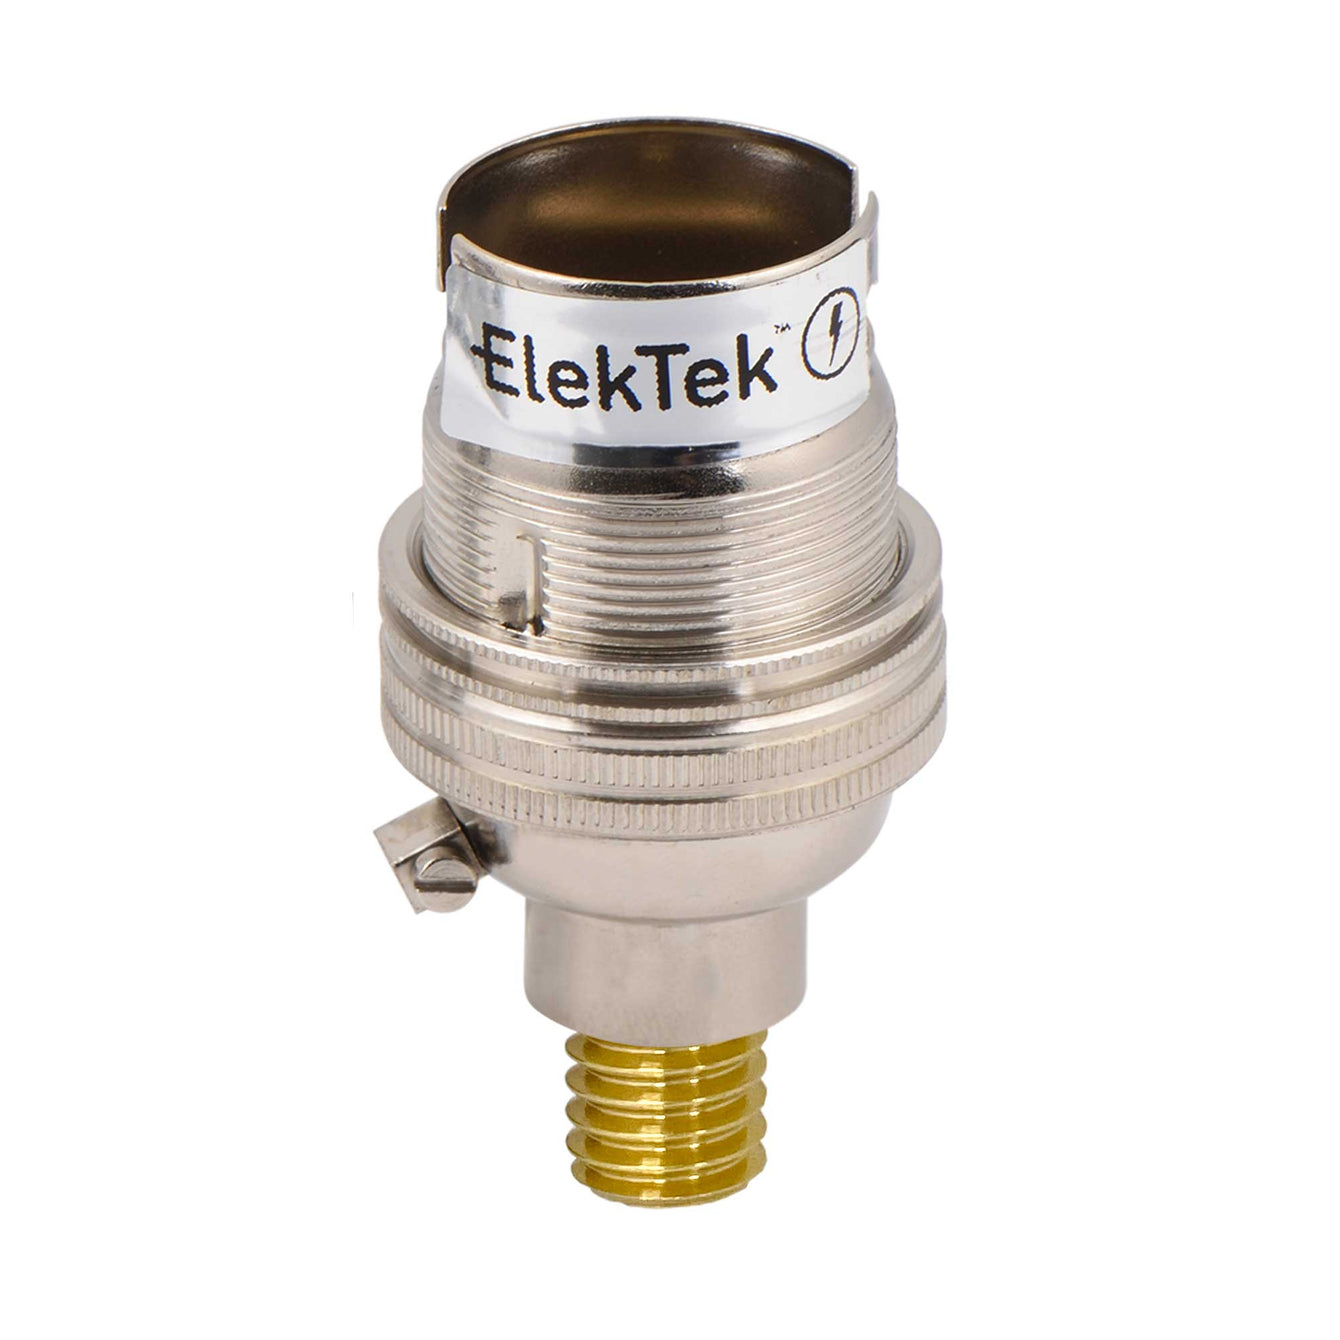 ElekTek Lamp Holder Half Inch Bayonet Cap B22 Unswitched With Shade Ring Wood Nipple Solid Brass 